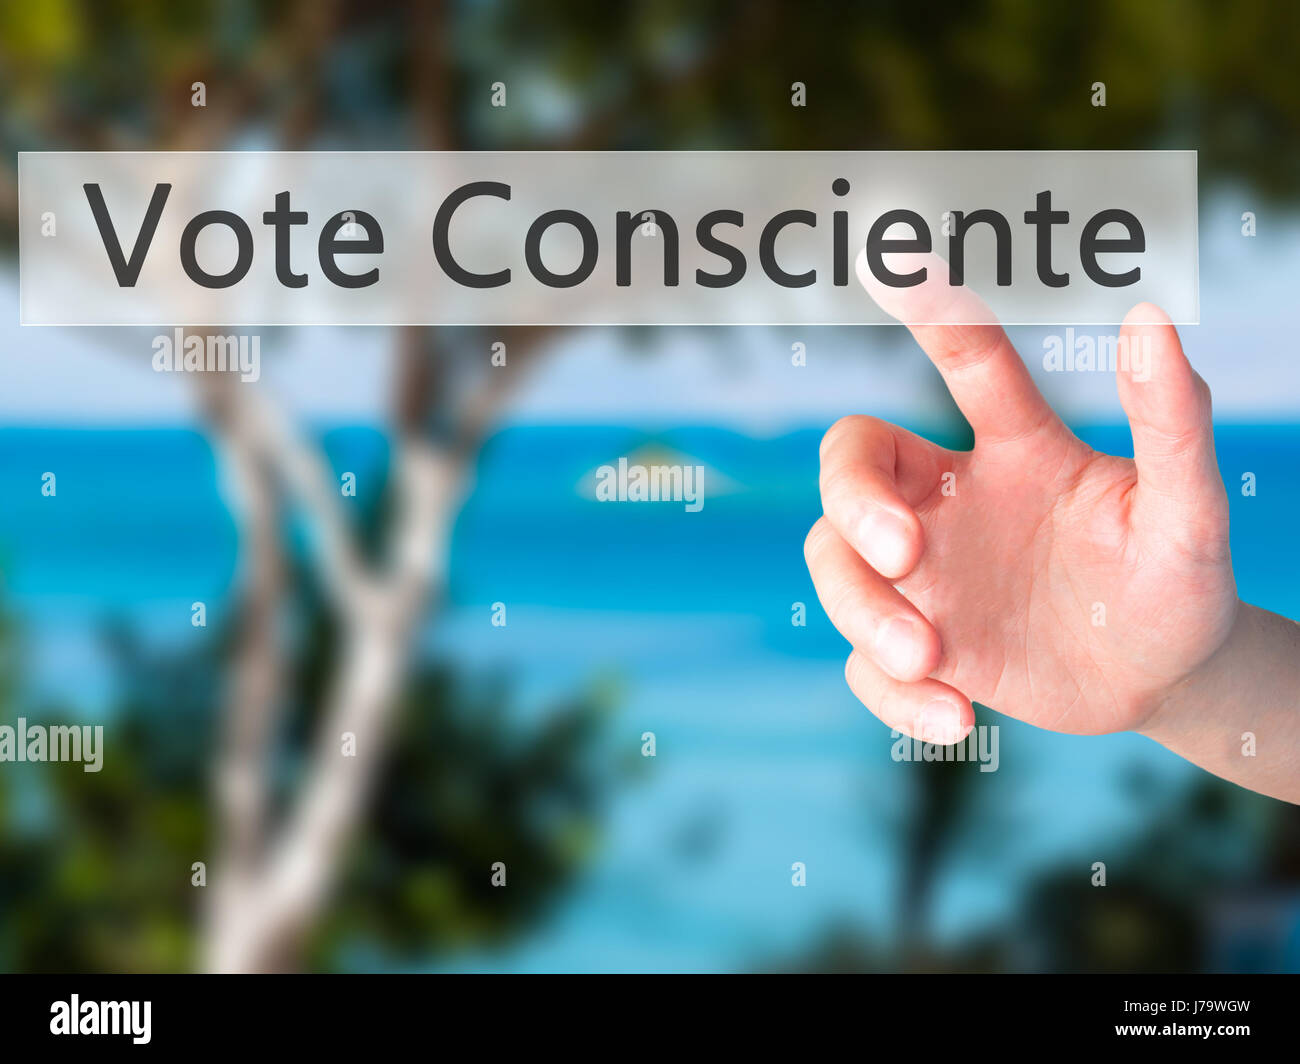 Vote Consciente - Hand pressing a button on blurred background concept . Business, technology, internet concept. Stock Photo Stock Photo